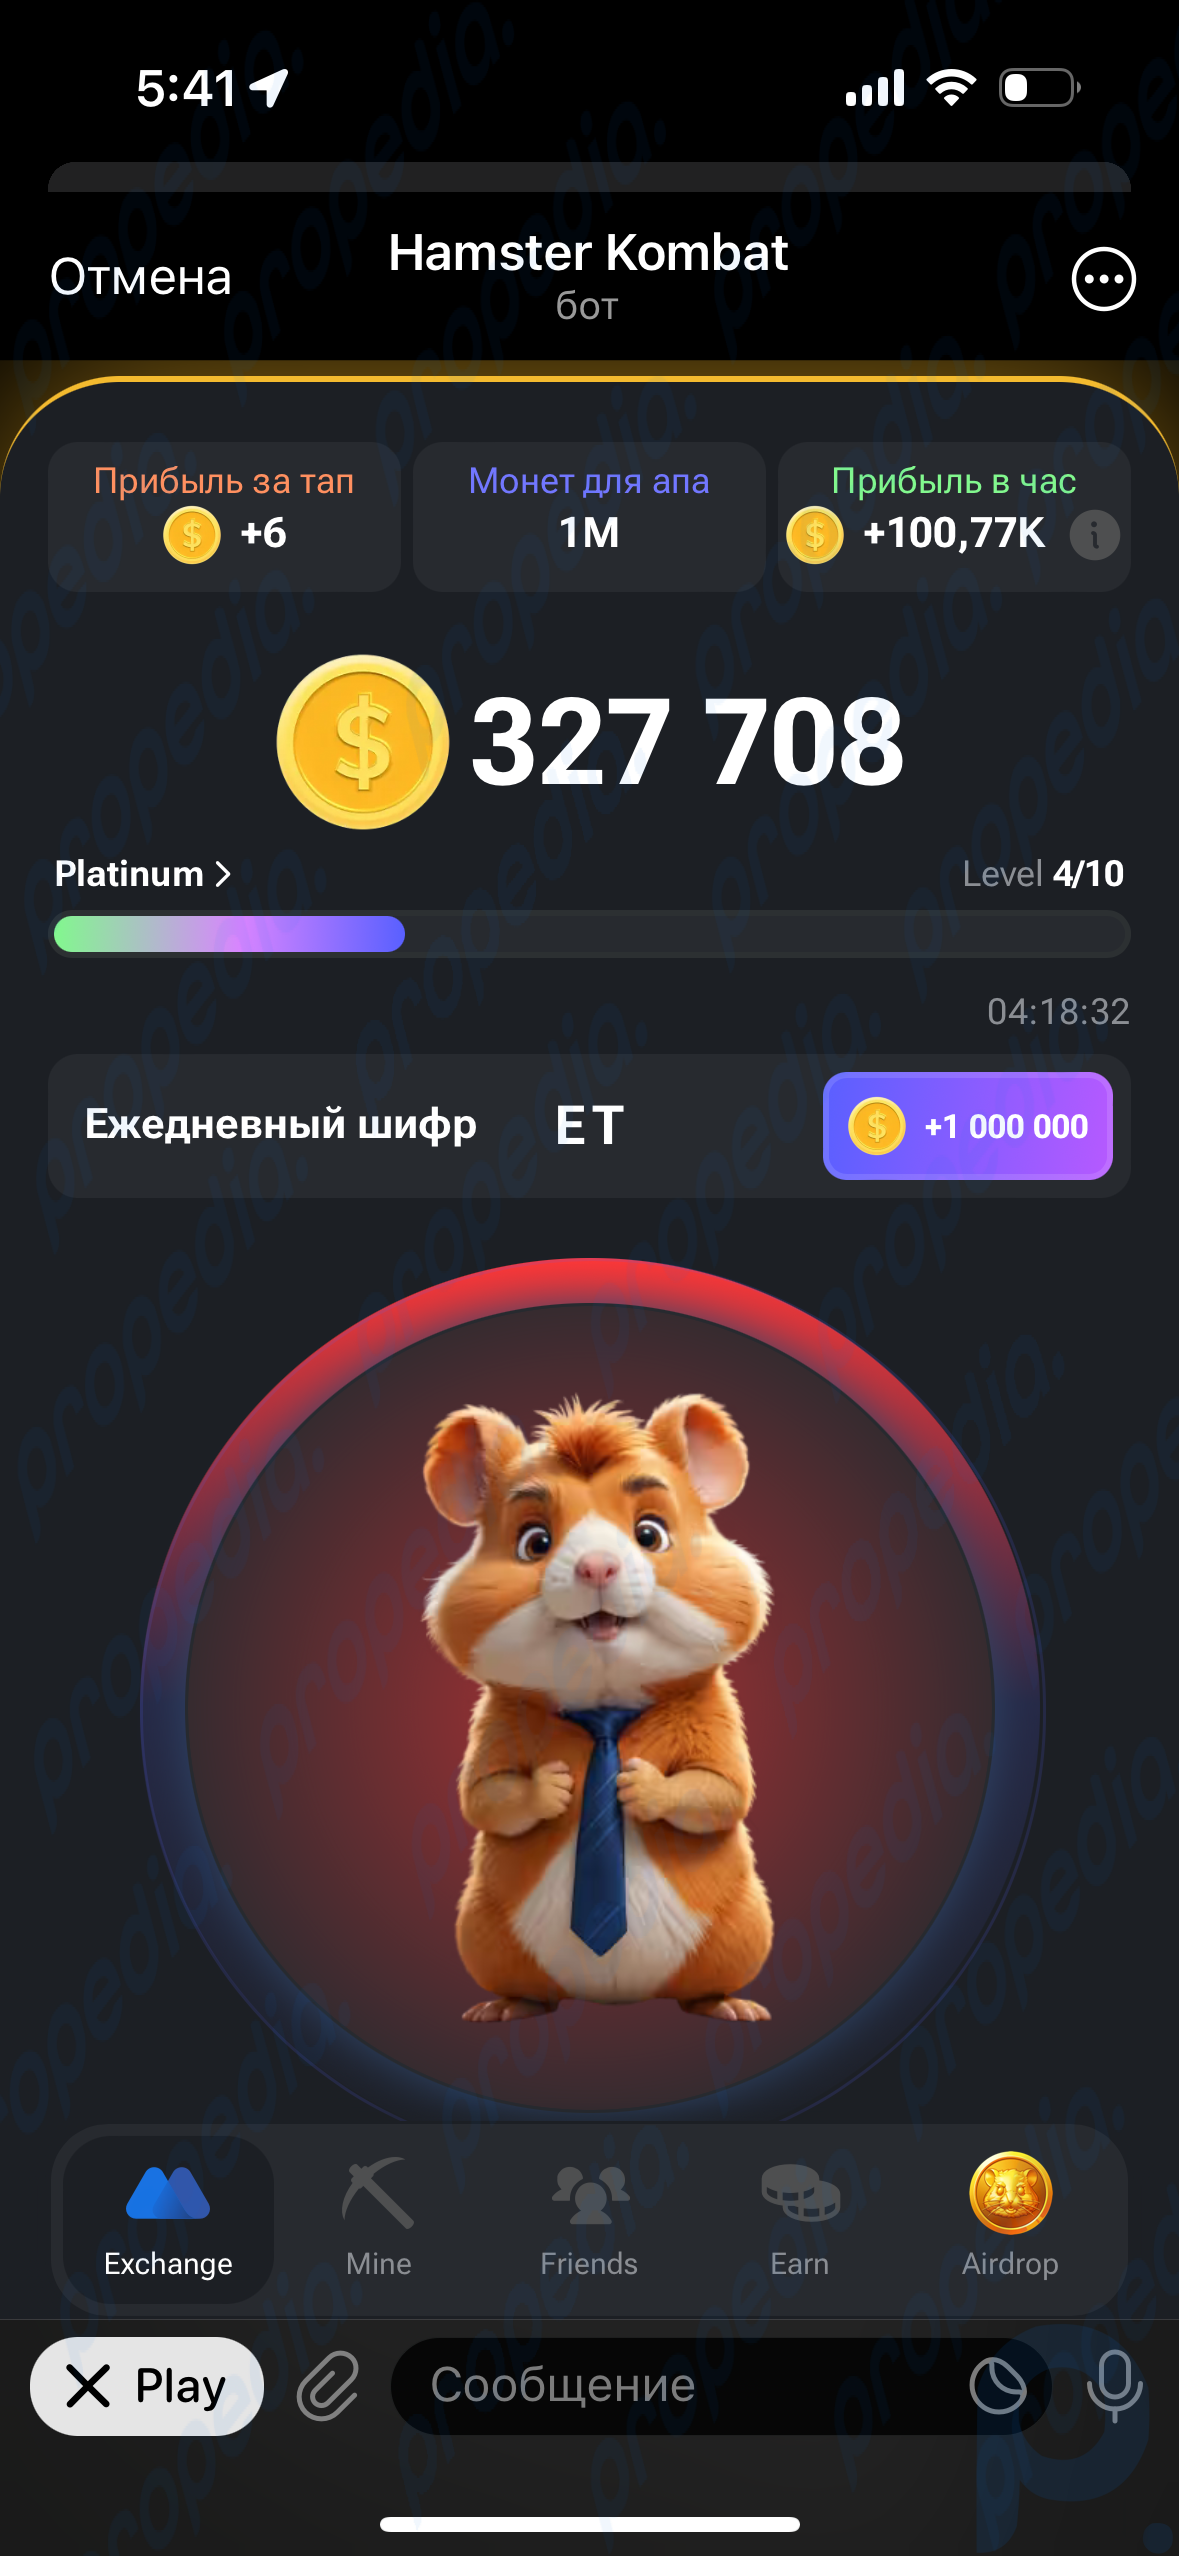 What is Hamster Kombat - a game on Telegram that everyone hopes to get rich from? 